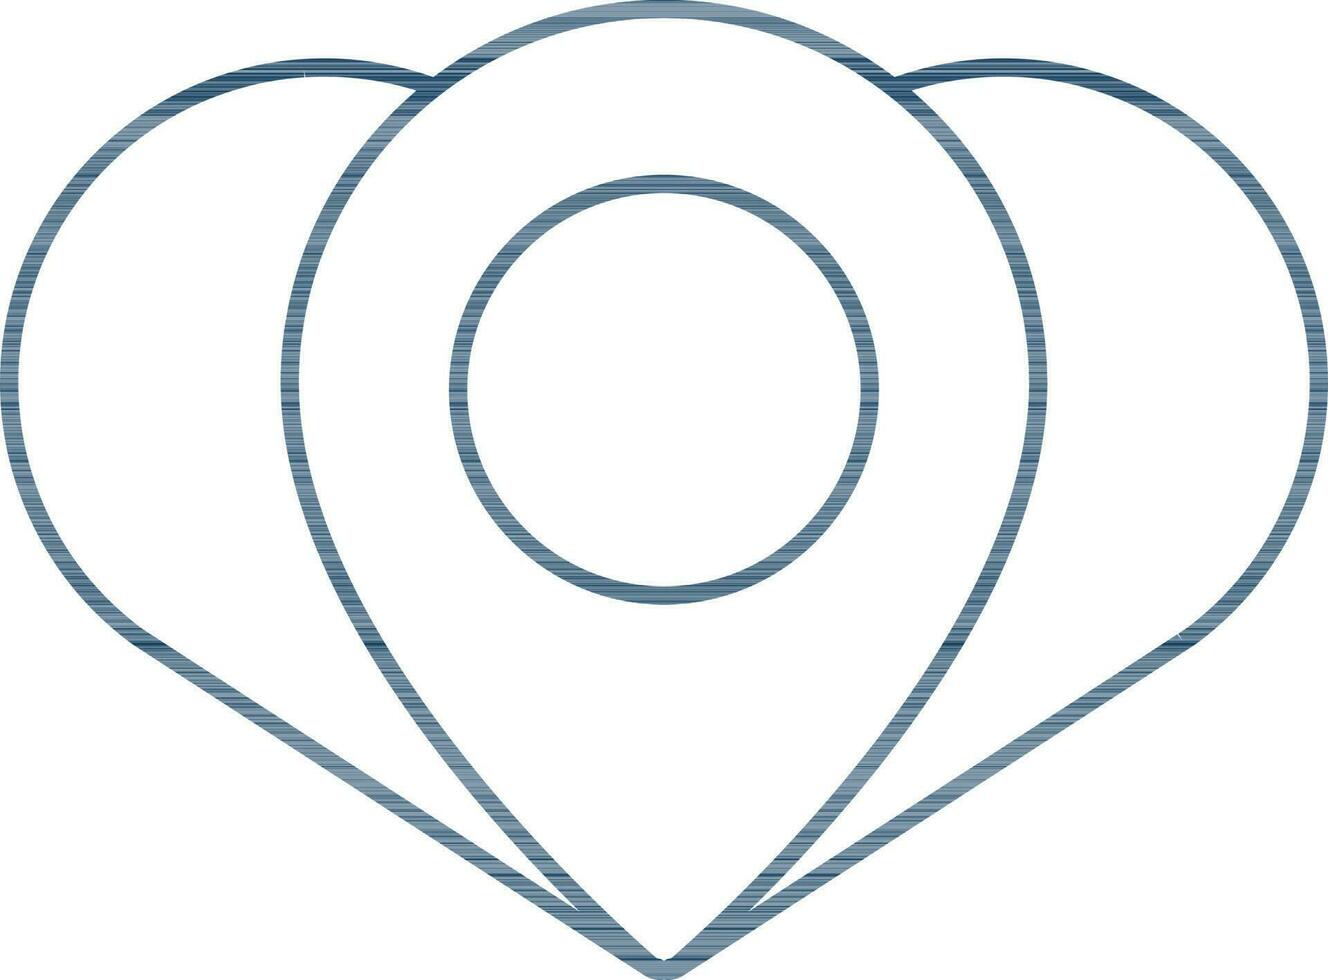 Illustration of Location in Heart Icon in Line Art. vector